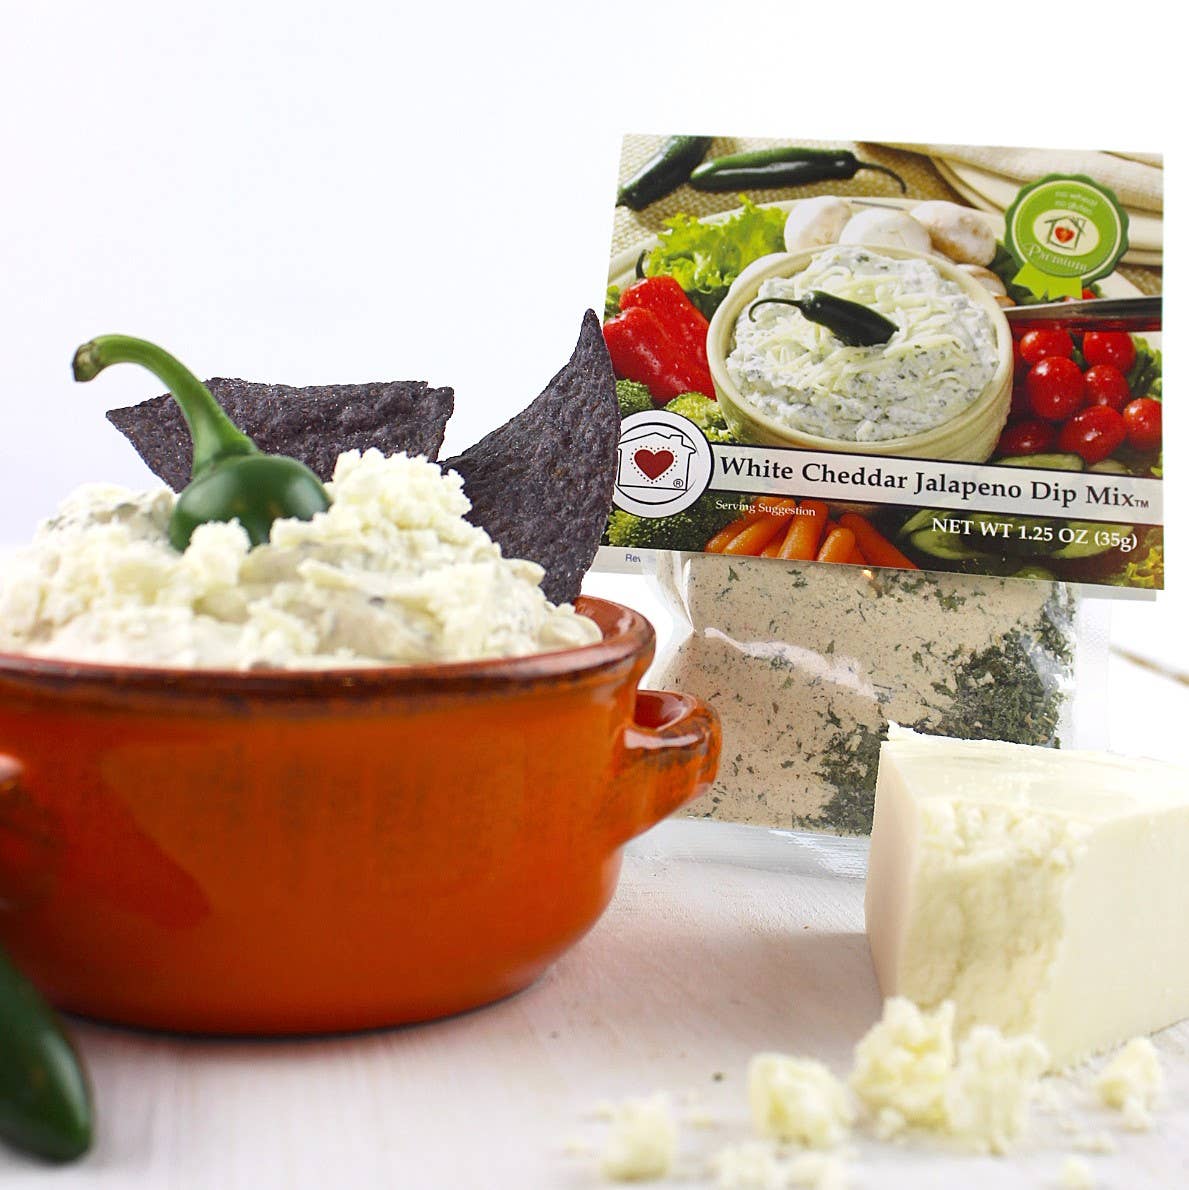 White Cheddar Jalapeno Dip Mix by Country Home Creations